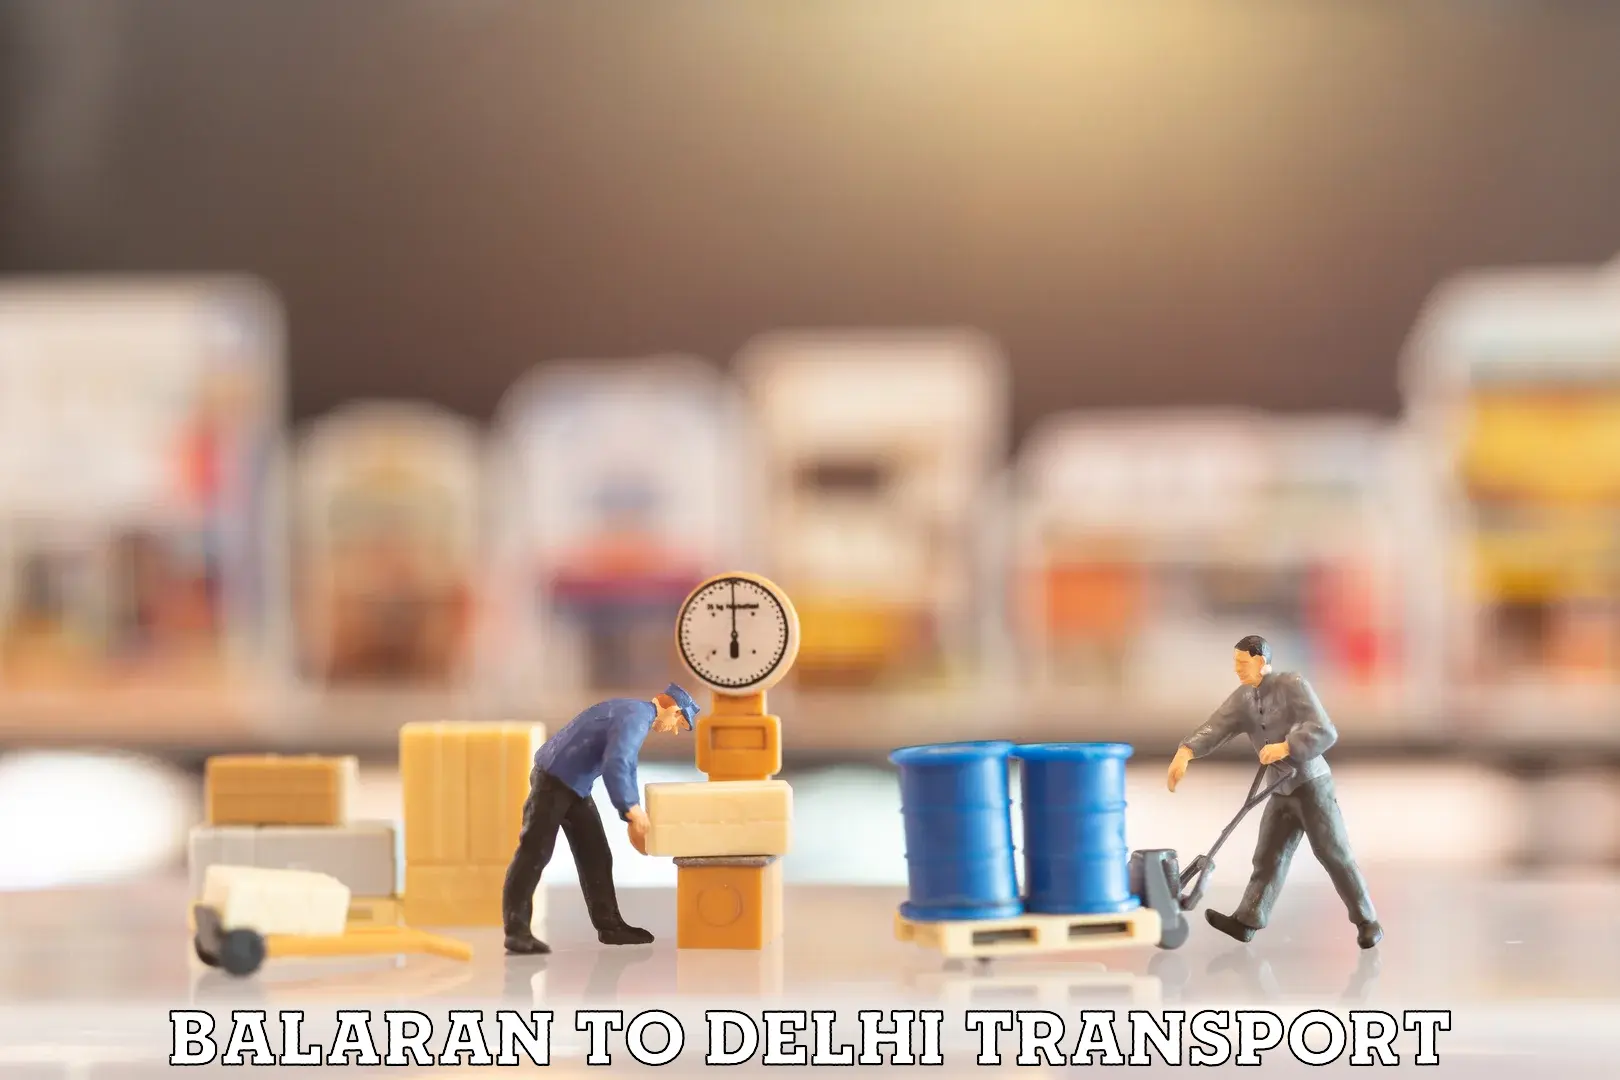 Goods delivery service Balaran to Lodhi Road